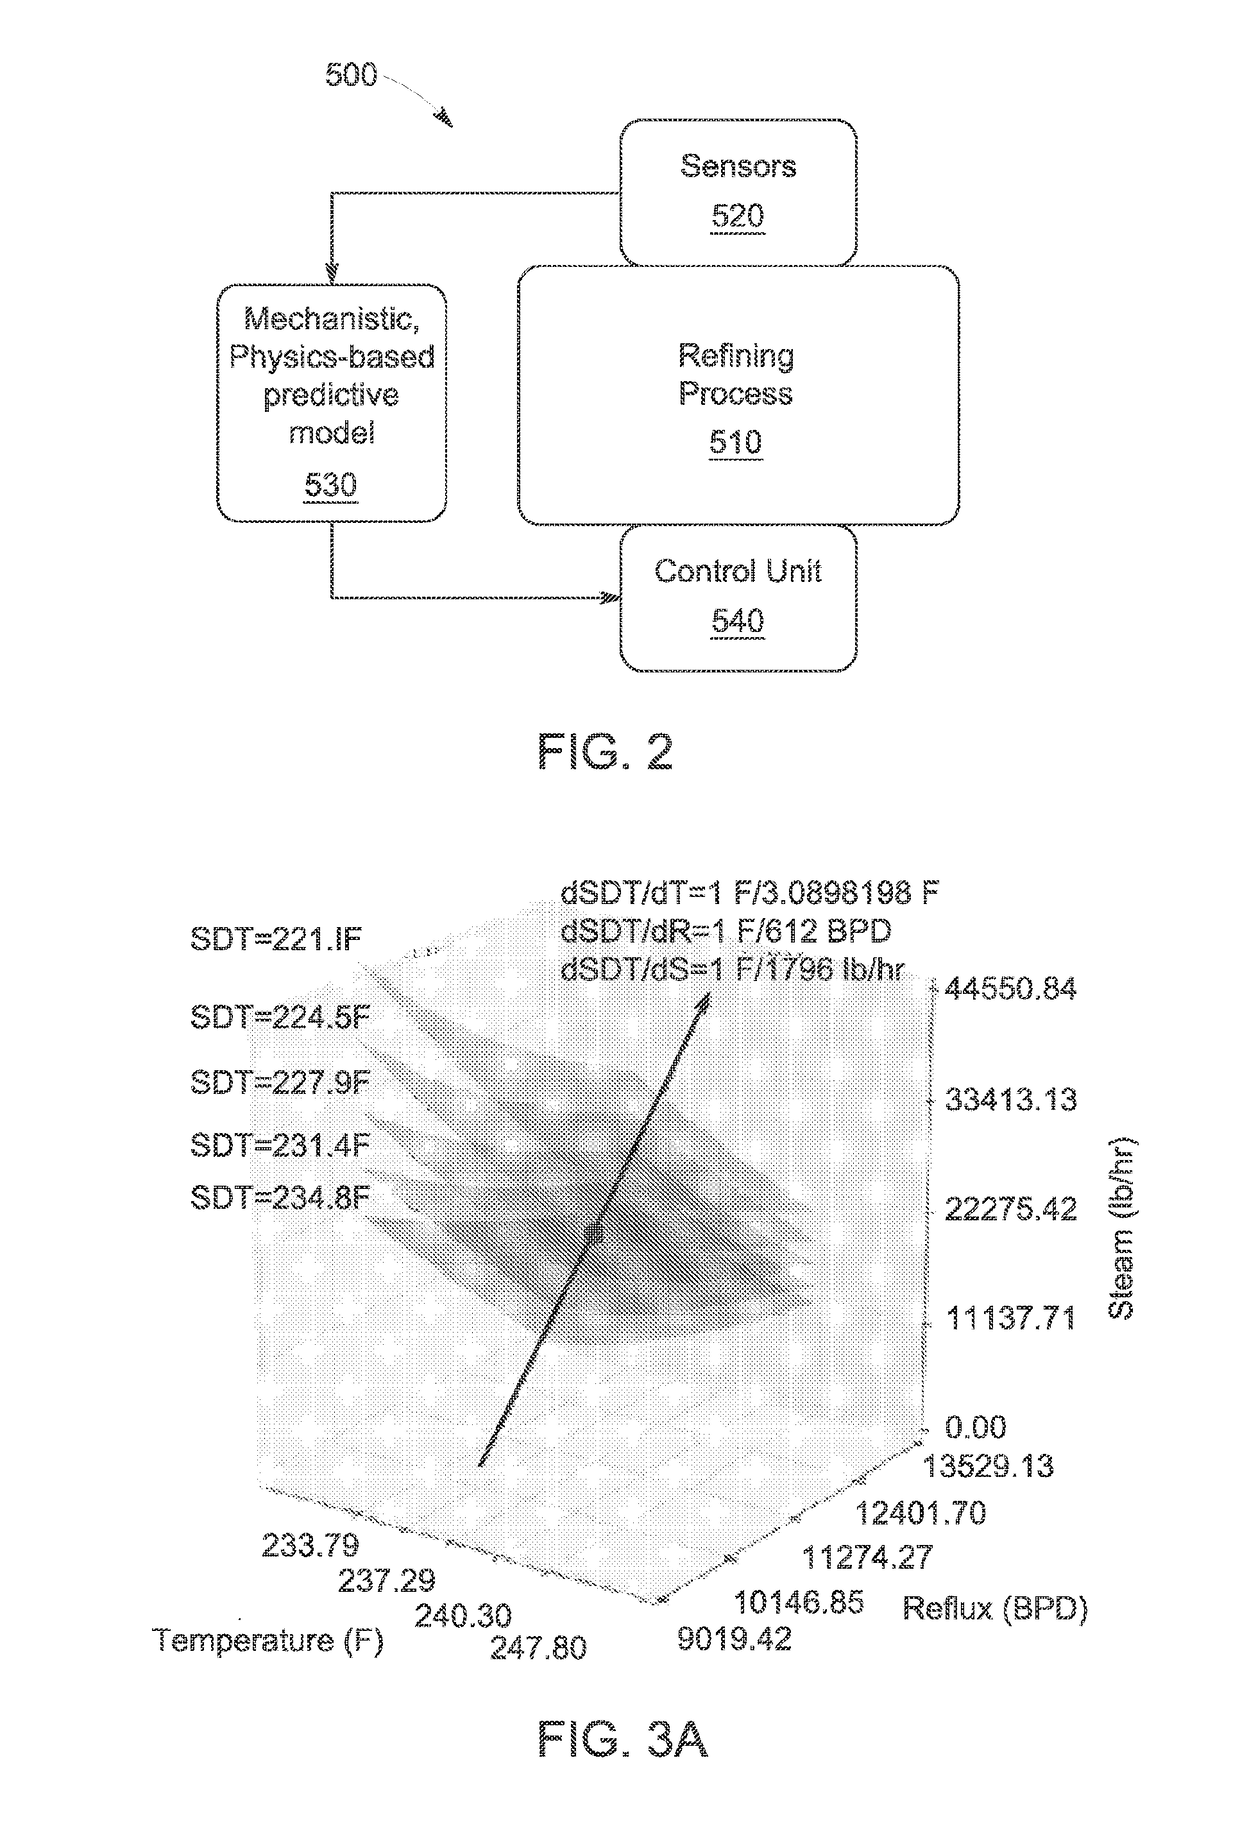 System and method of predictive analytics for control of an overhead crude section of a hydrocarbon refining process